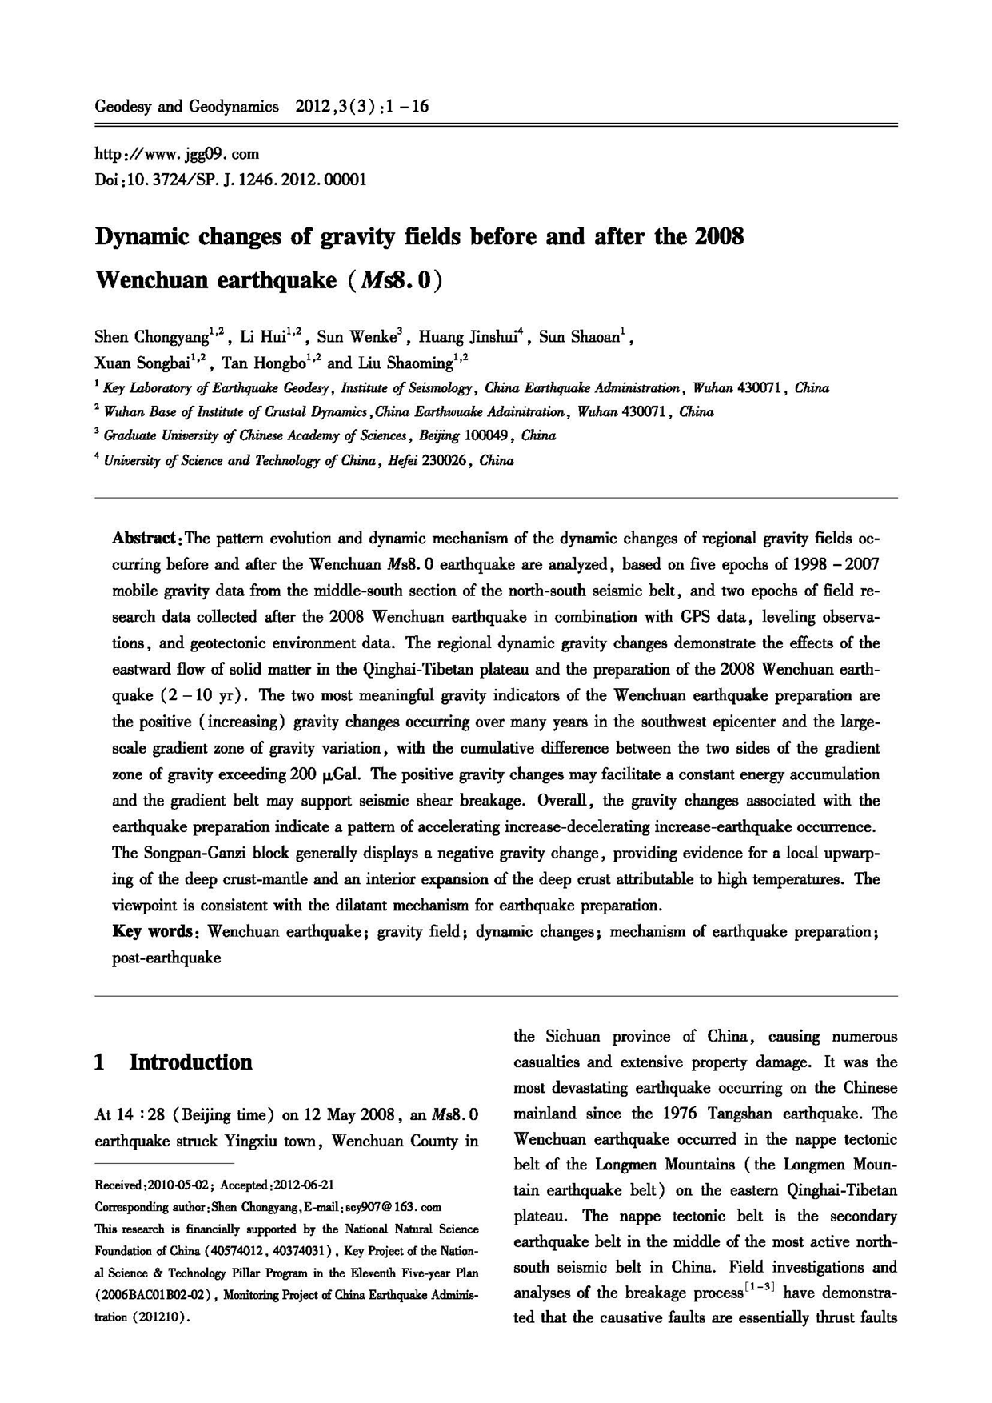 Dynamic changes of gravity fields before and after the 2008 Wenchuan earthquake (Ms8.0) 